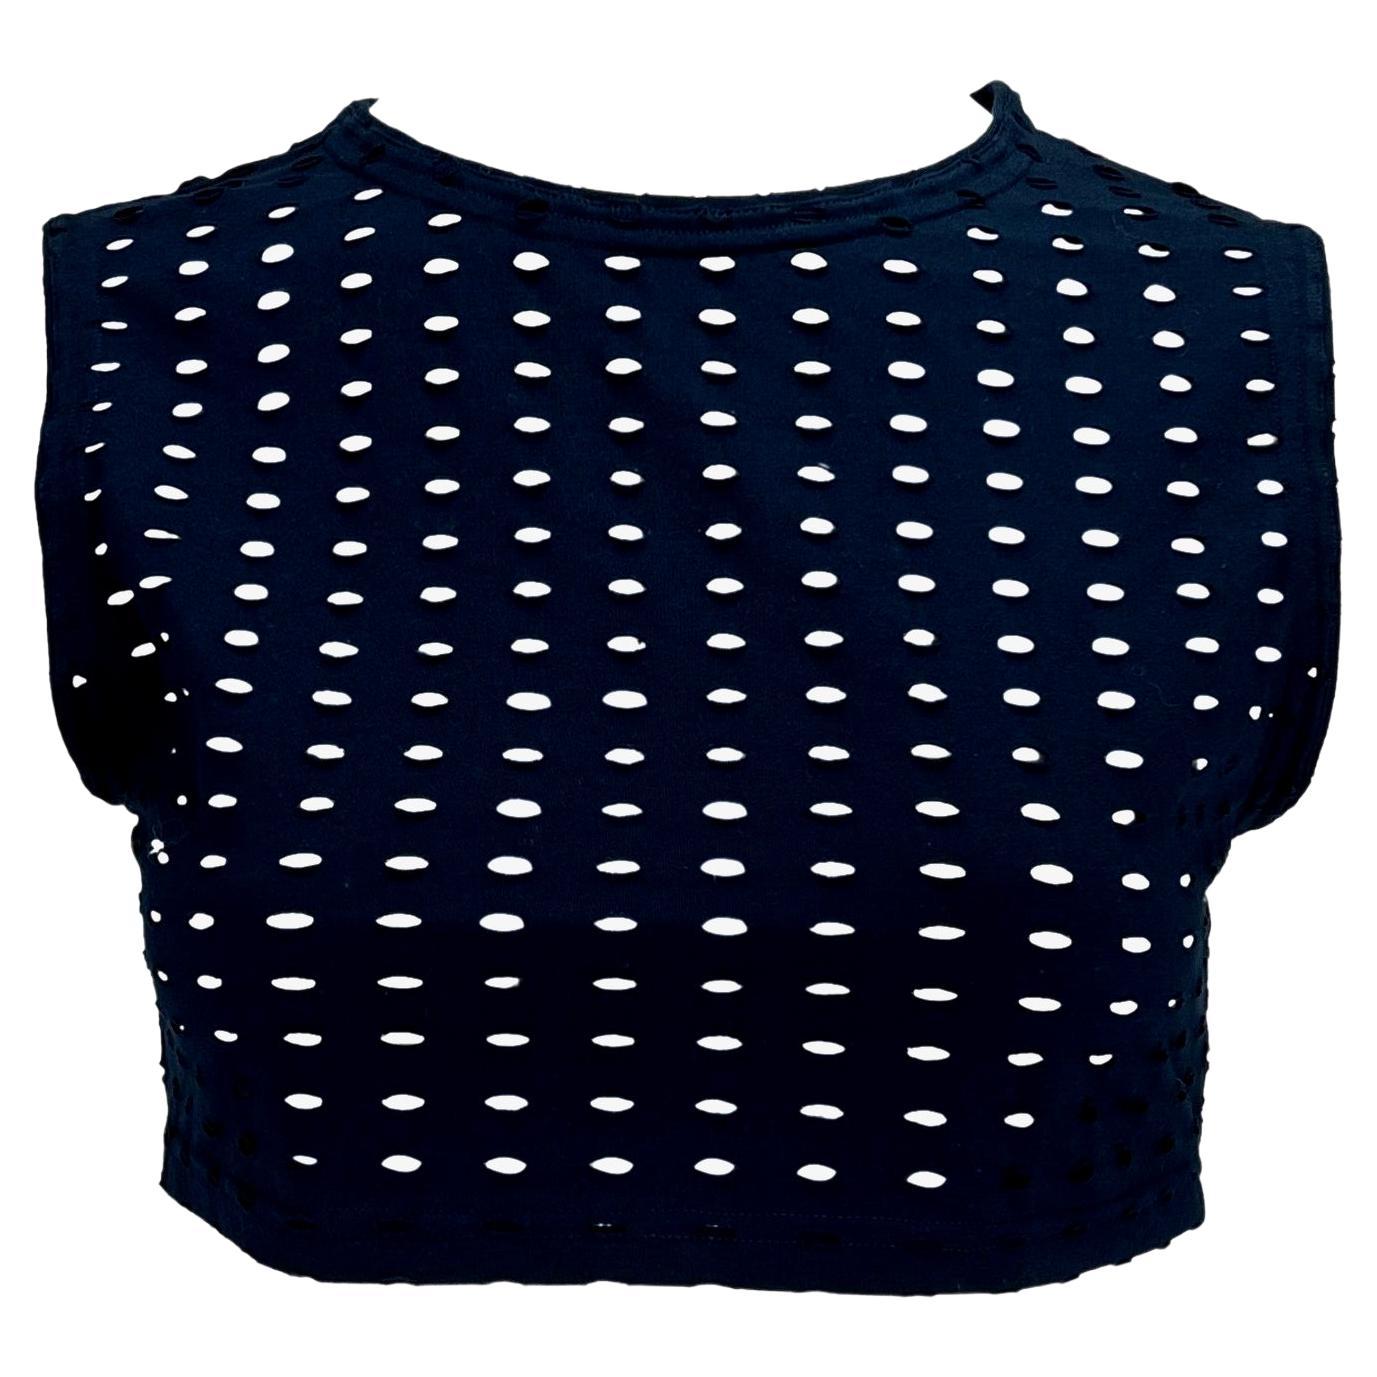 S/S 1994 Gianni Versace Couture Navy Eyelet Crop Top Punk Sheer For Sale